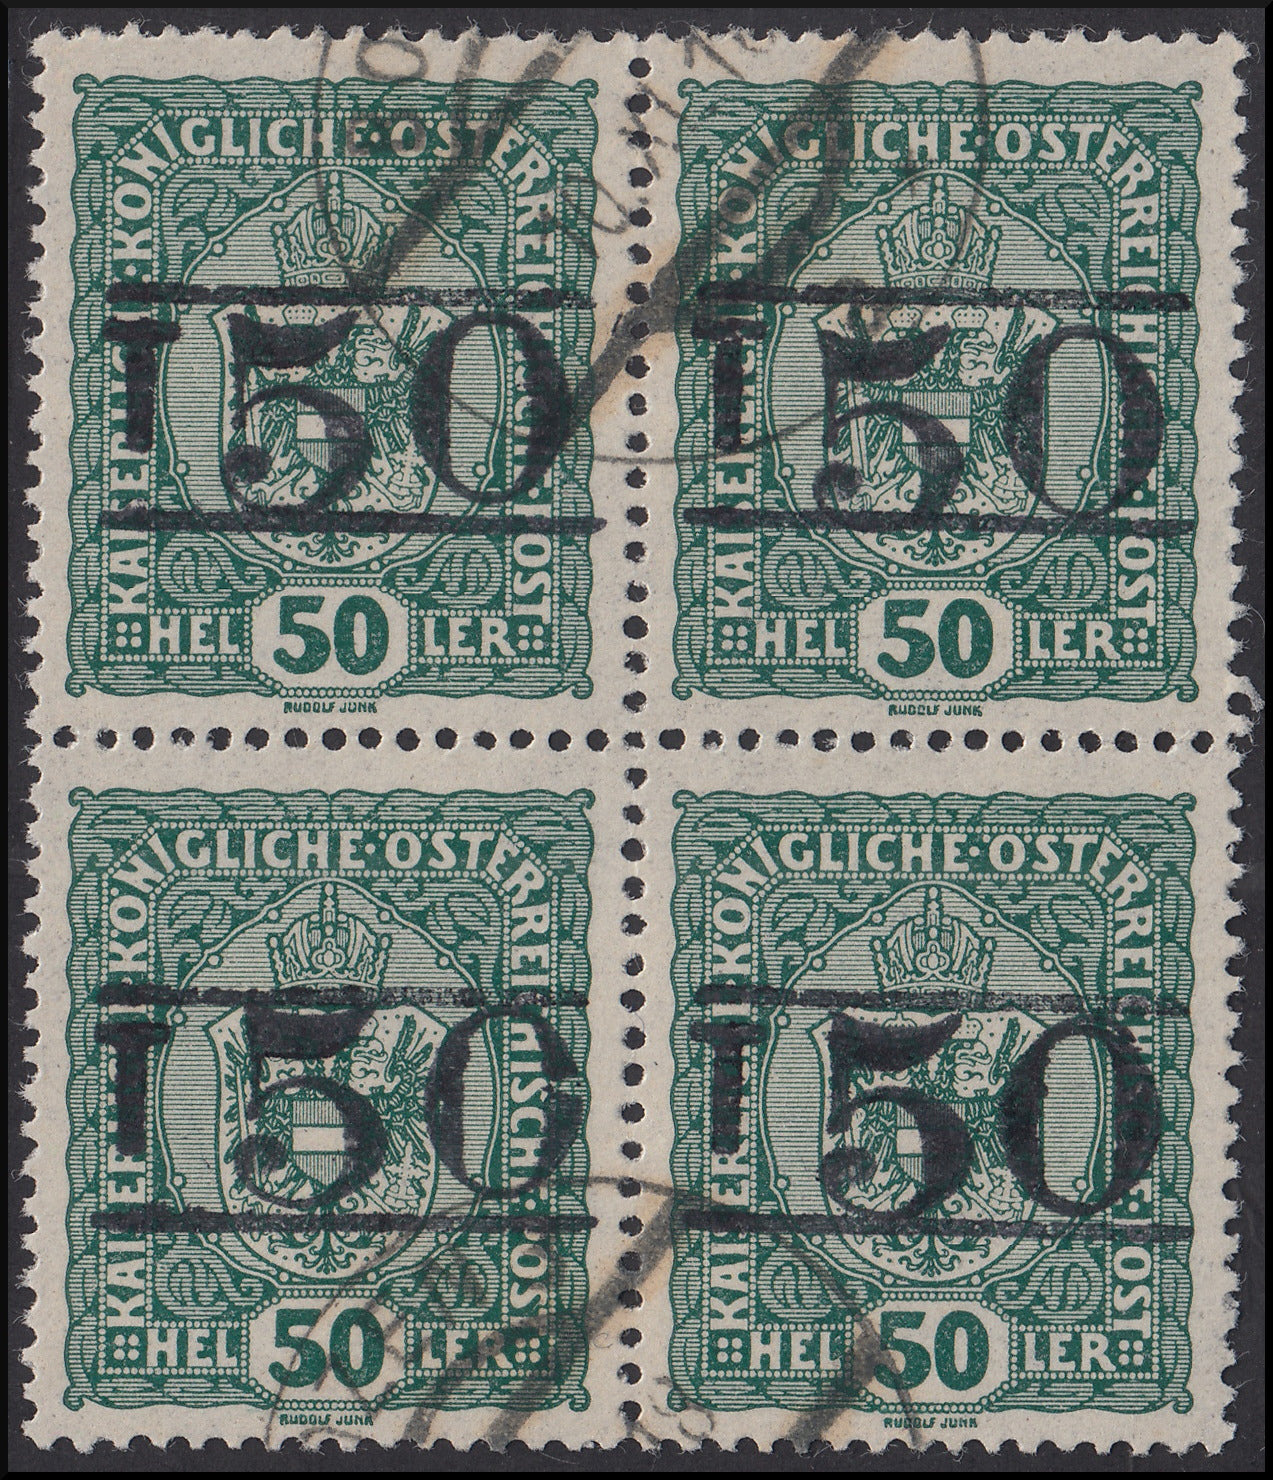 BZ19 - 1918/19 - Trentino Alto Adige, Bolzano office 3, green 50 heller Austrian stamp with overprint "T + larger body digit between two lines", used block of four copies (BZ3/8)